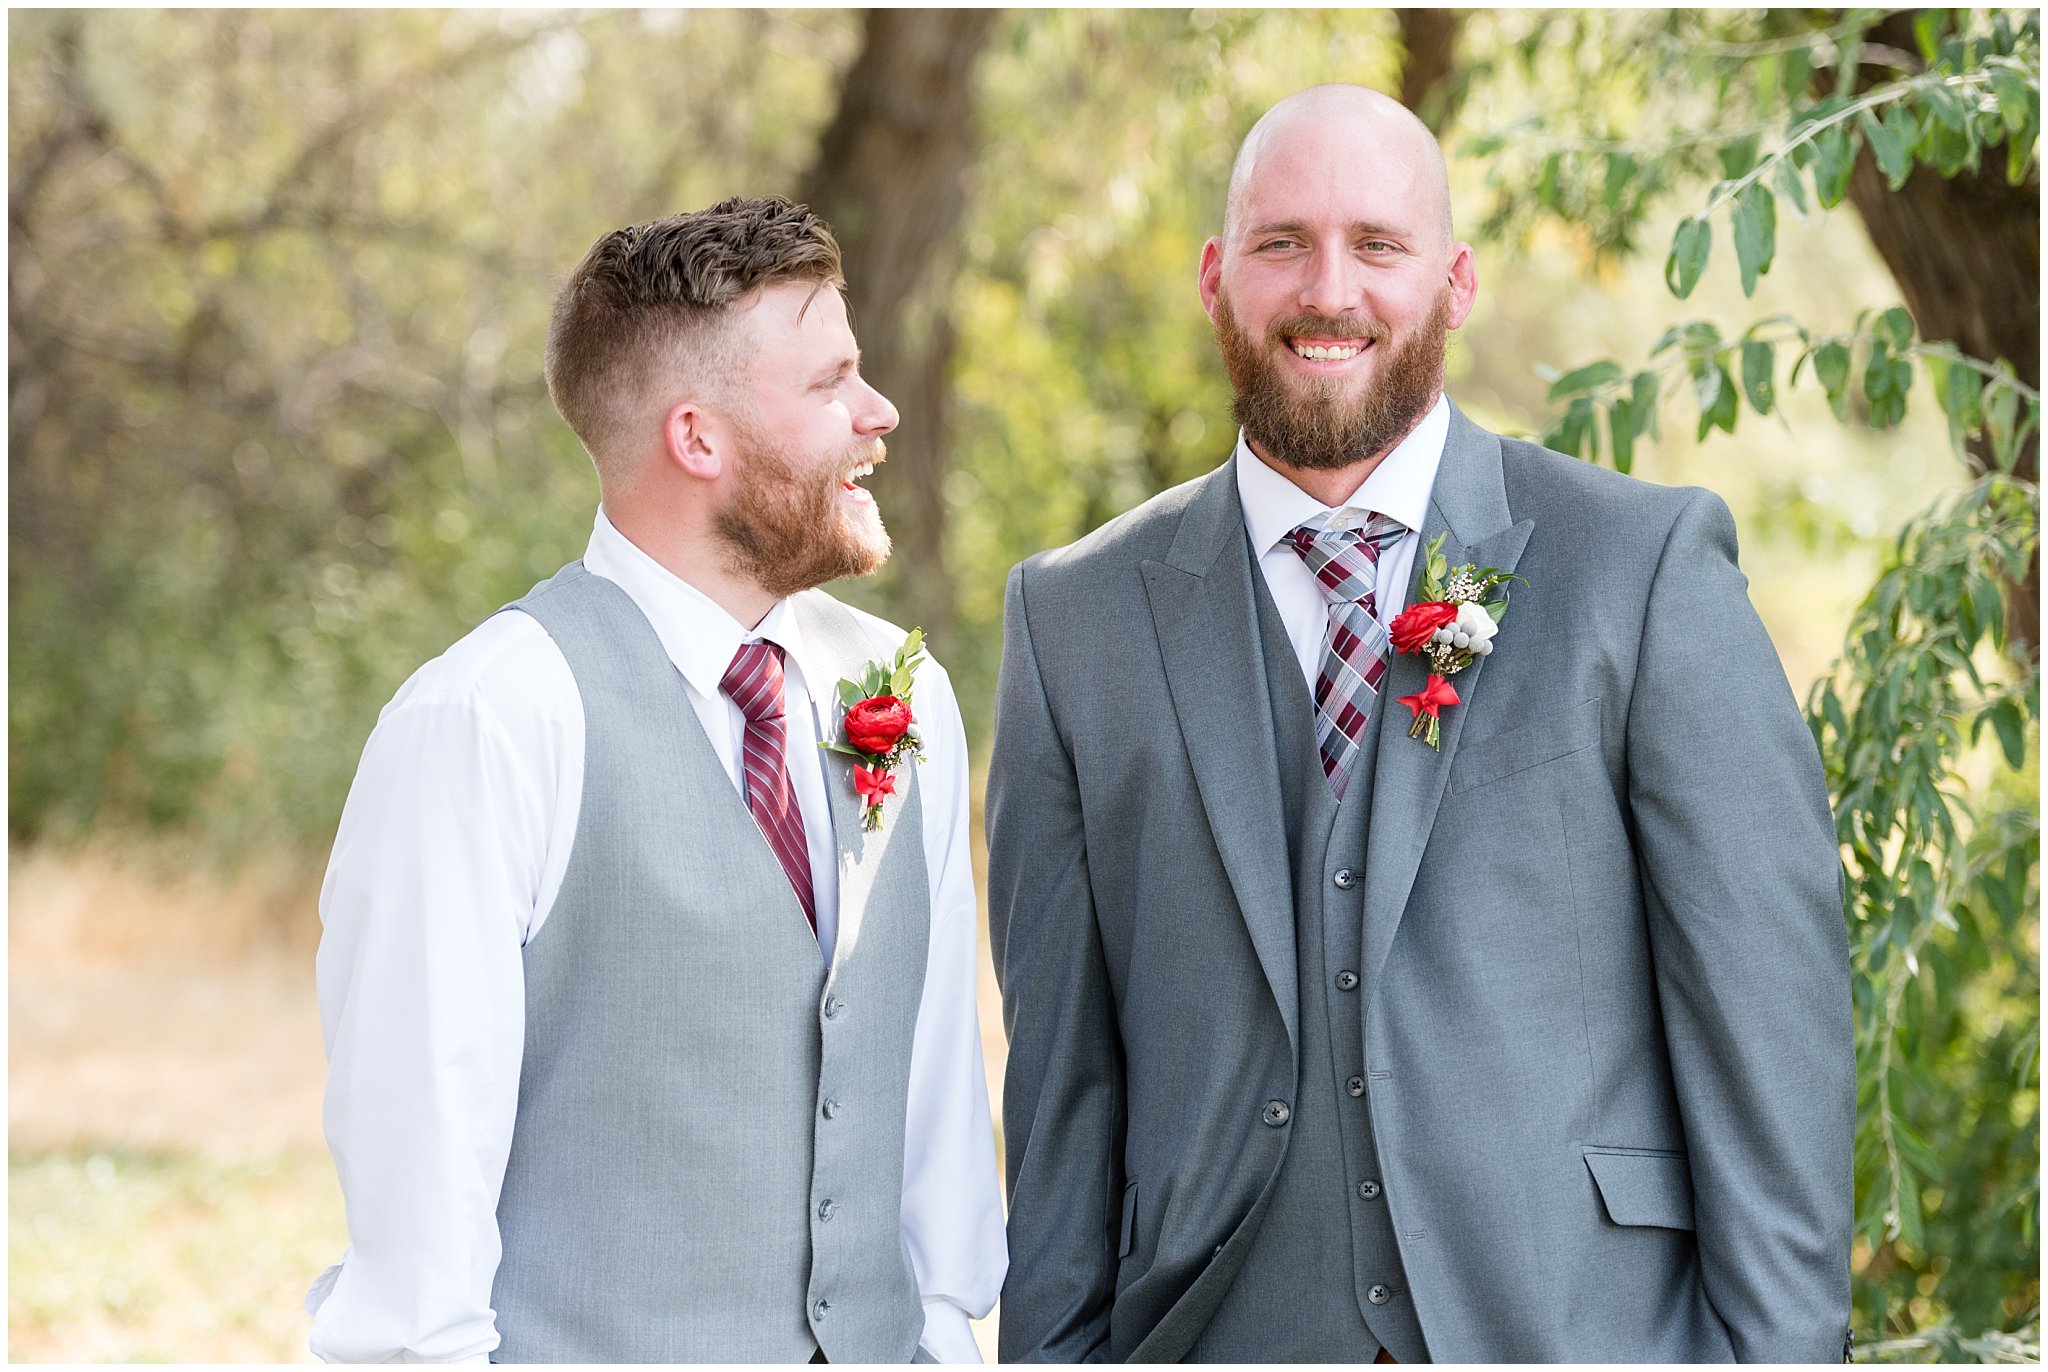 Groom and groomsmen laughing portrait | Davis County Outdoor Wedding | Jessie and Dallin Photography